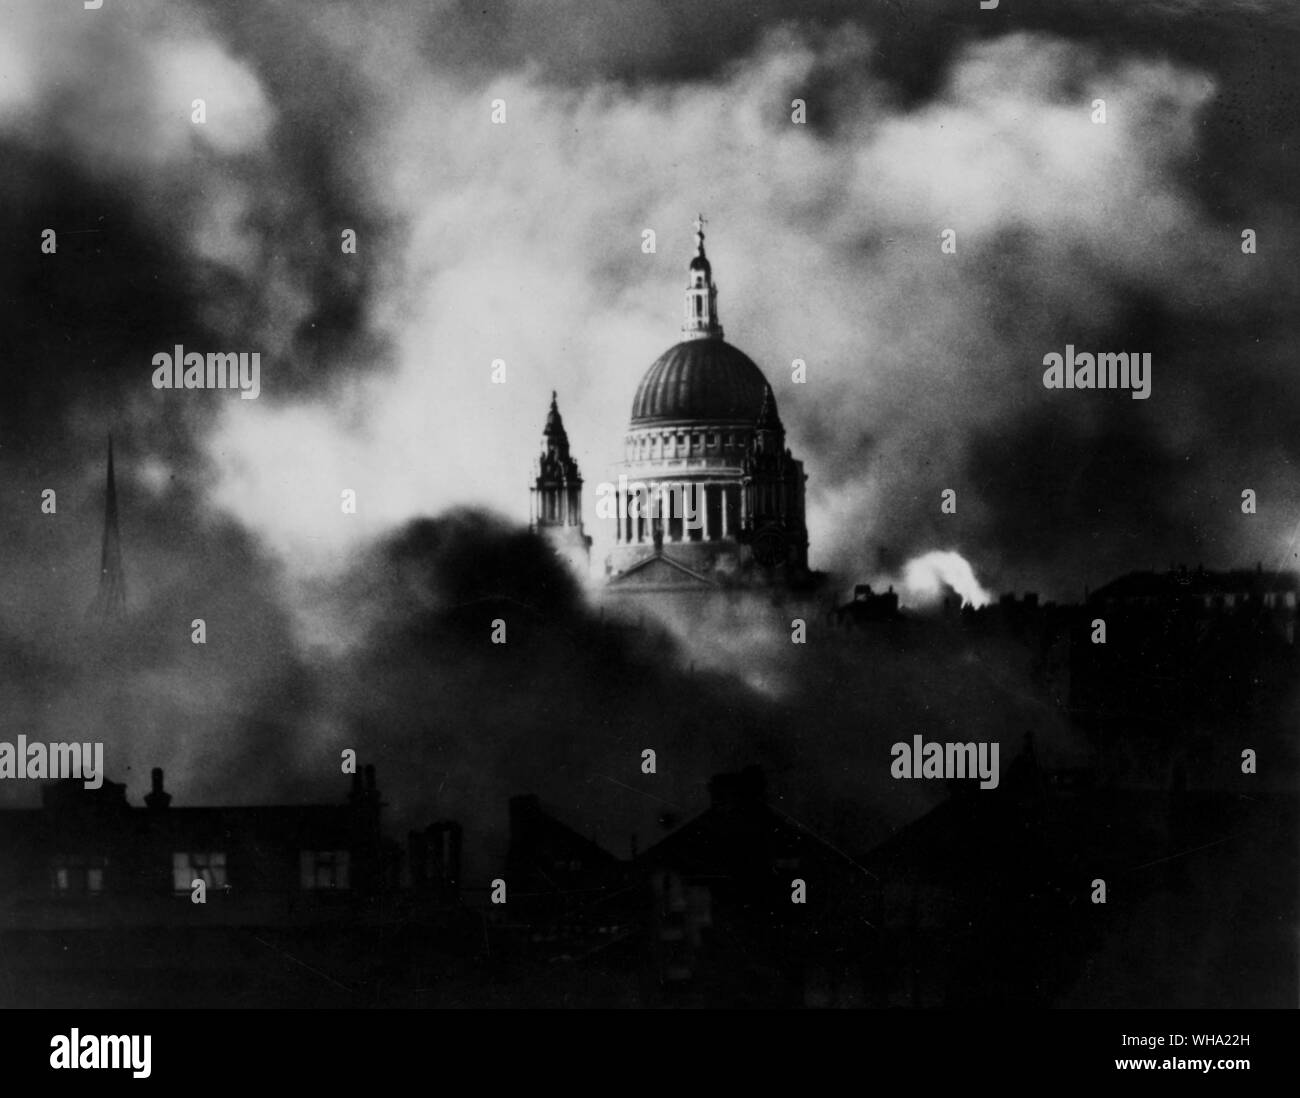 WW2: London during the war, with fires near St Paul's Cathedral. Stock Photo